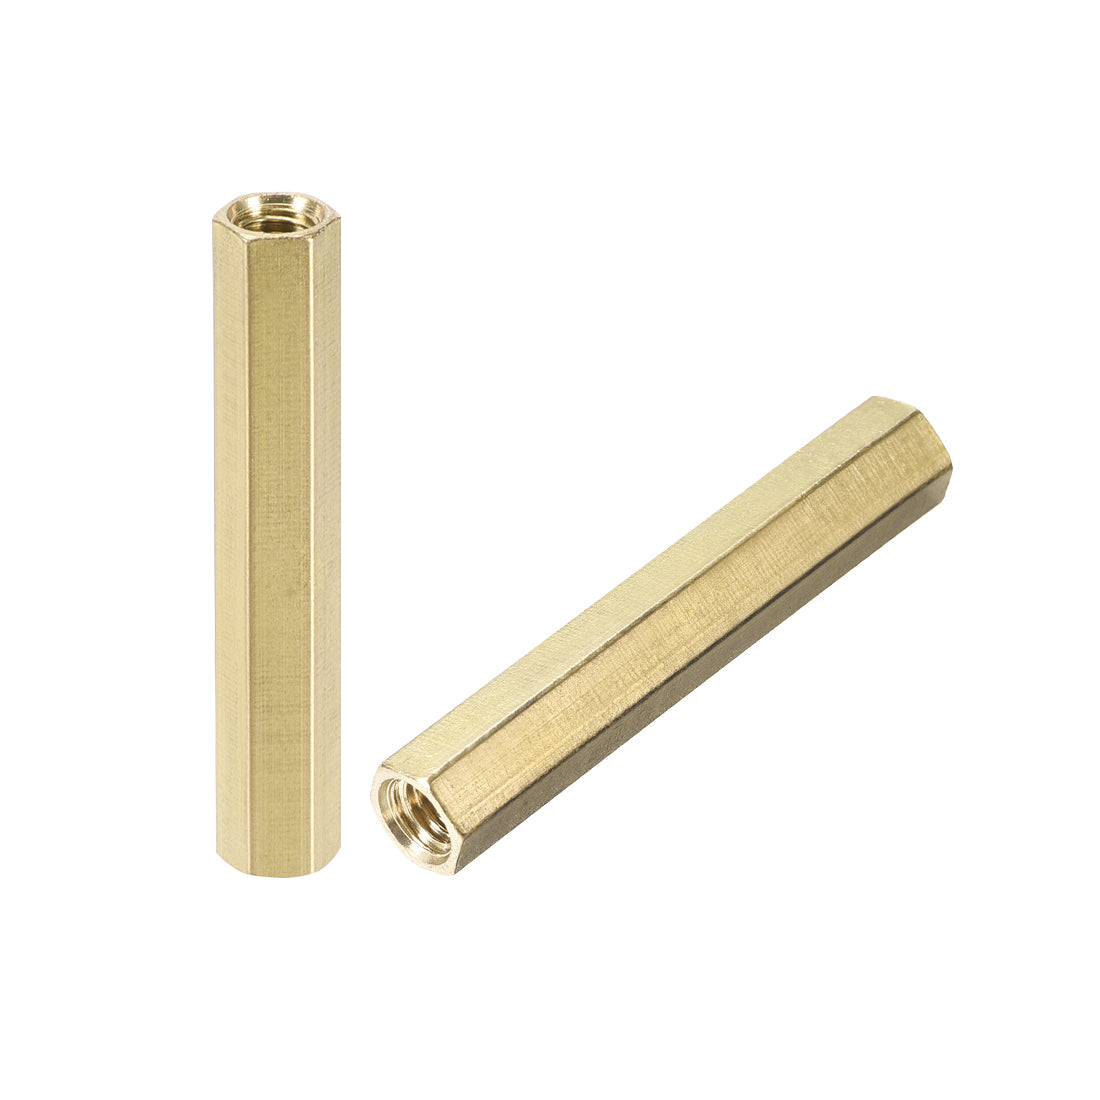 uxcell Uxcell M6 x 50mm Female to Female Hex Brass Spacer Standoff 2pcs